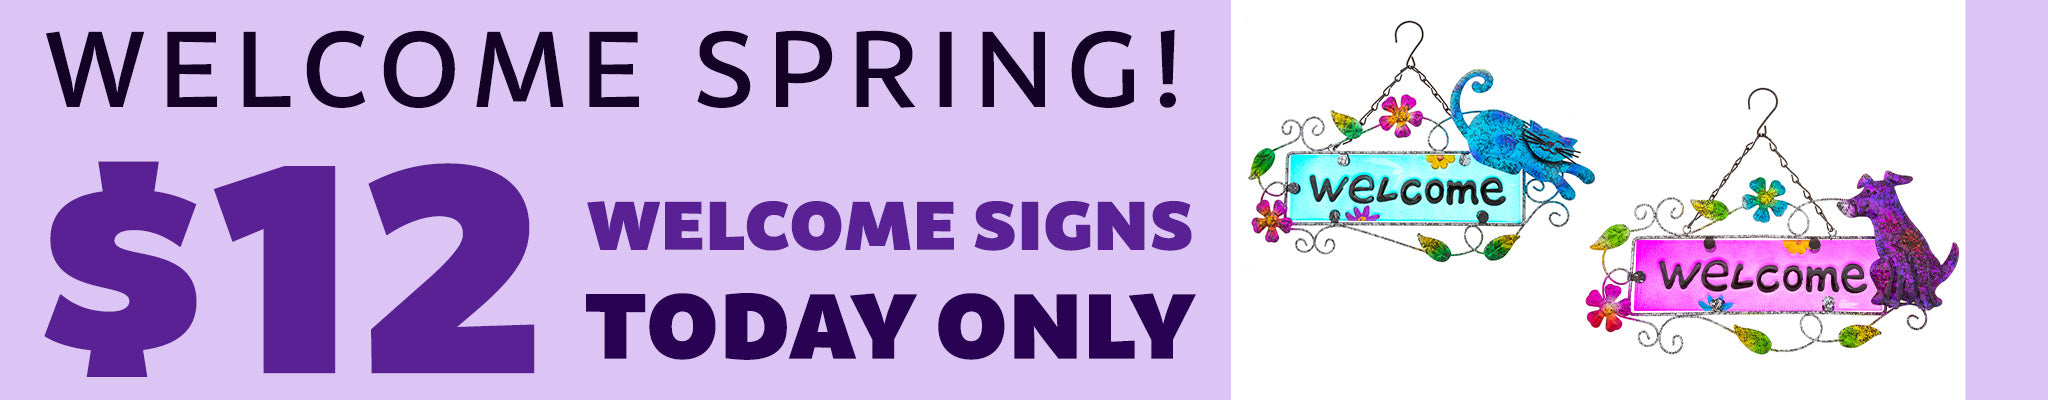 Welcome Spring! $12 Welcome Signs | Today Only